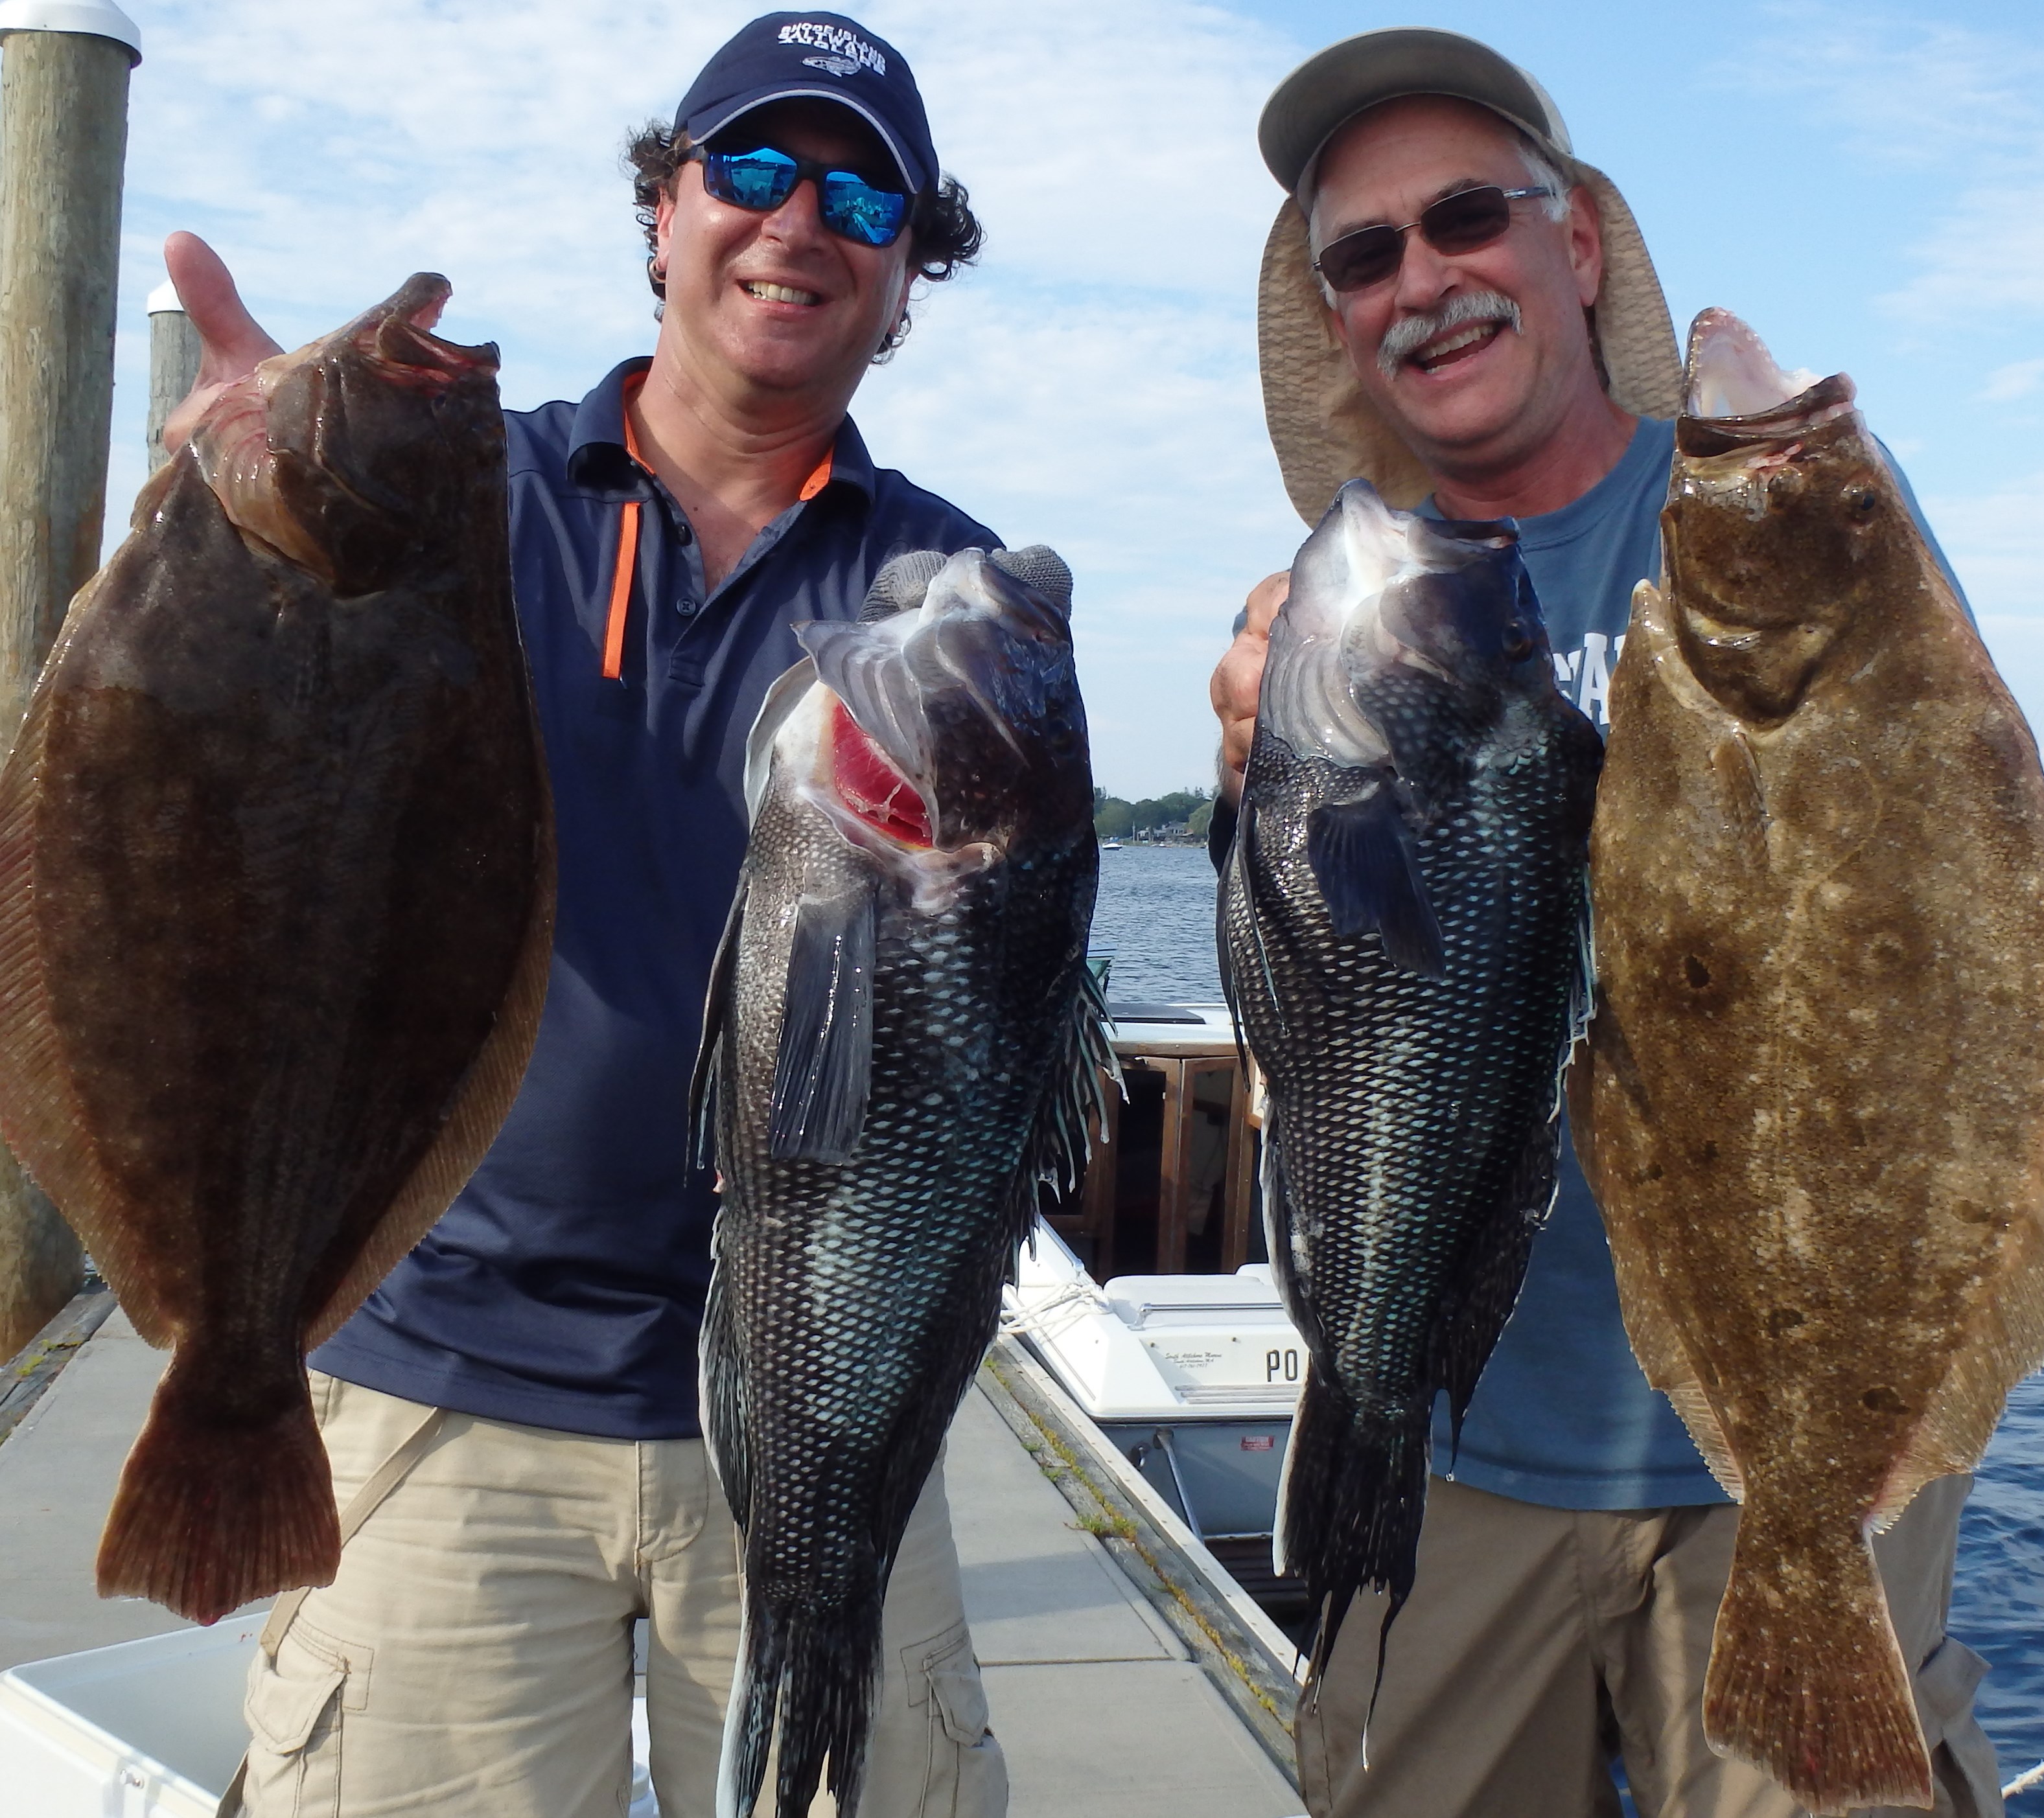 Steve Brustein of Portland, ME and Kevin Fetzer of East Greenwich, RI with some of the fluke and black sea bass they caught off Block Island thanks to the healthy bio mass of both species.